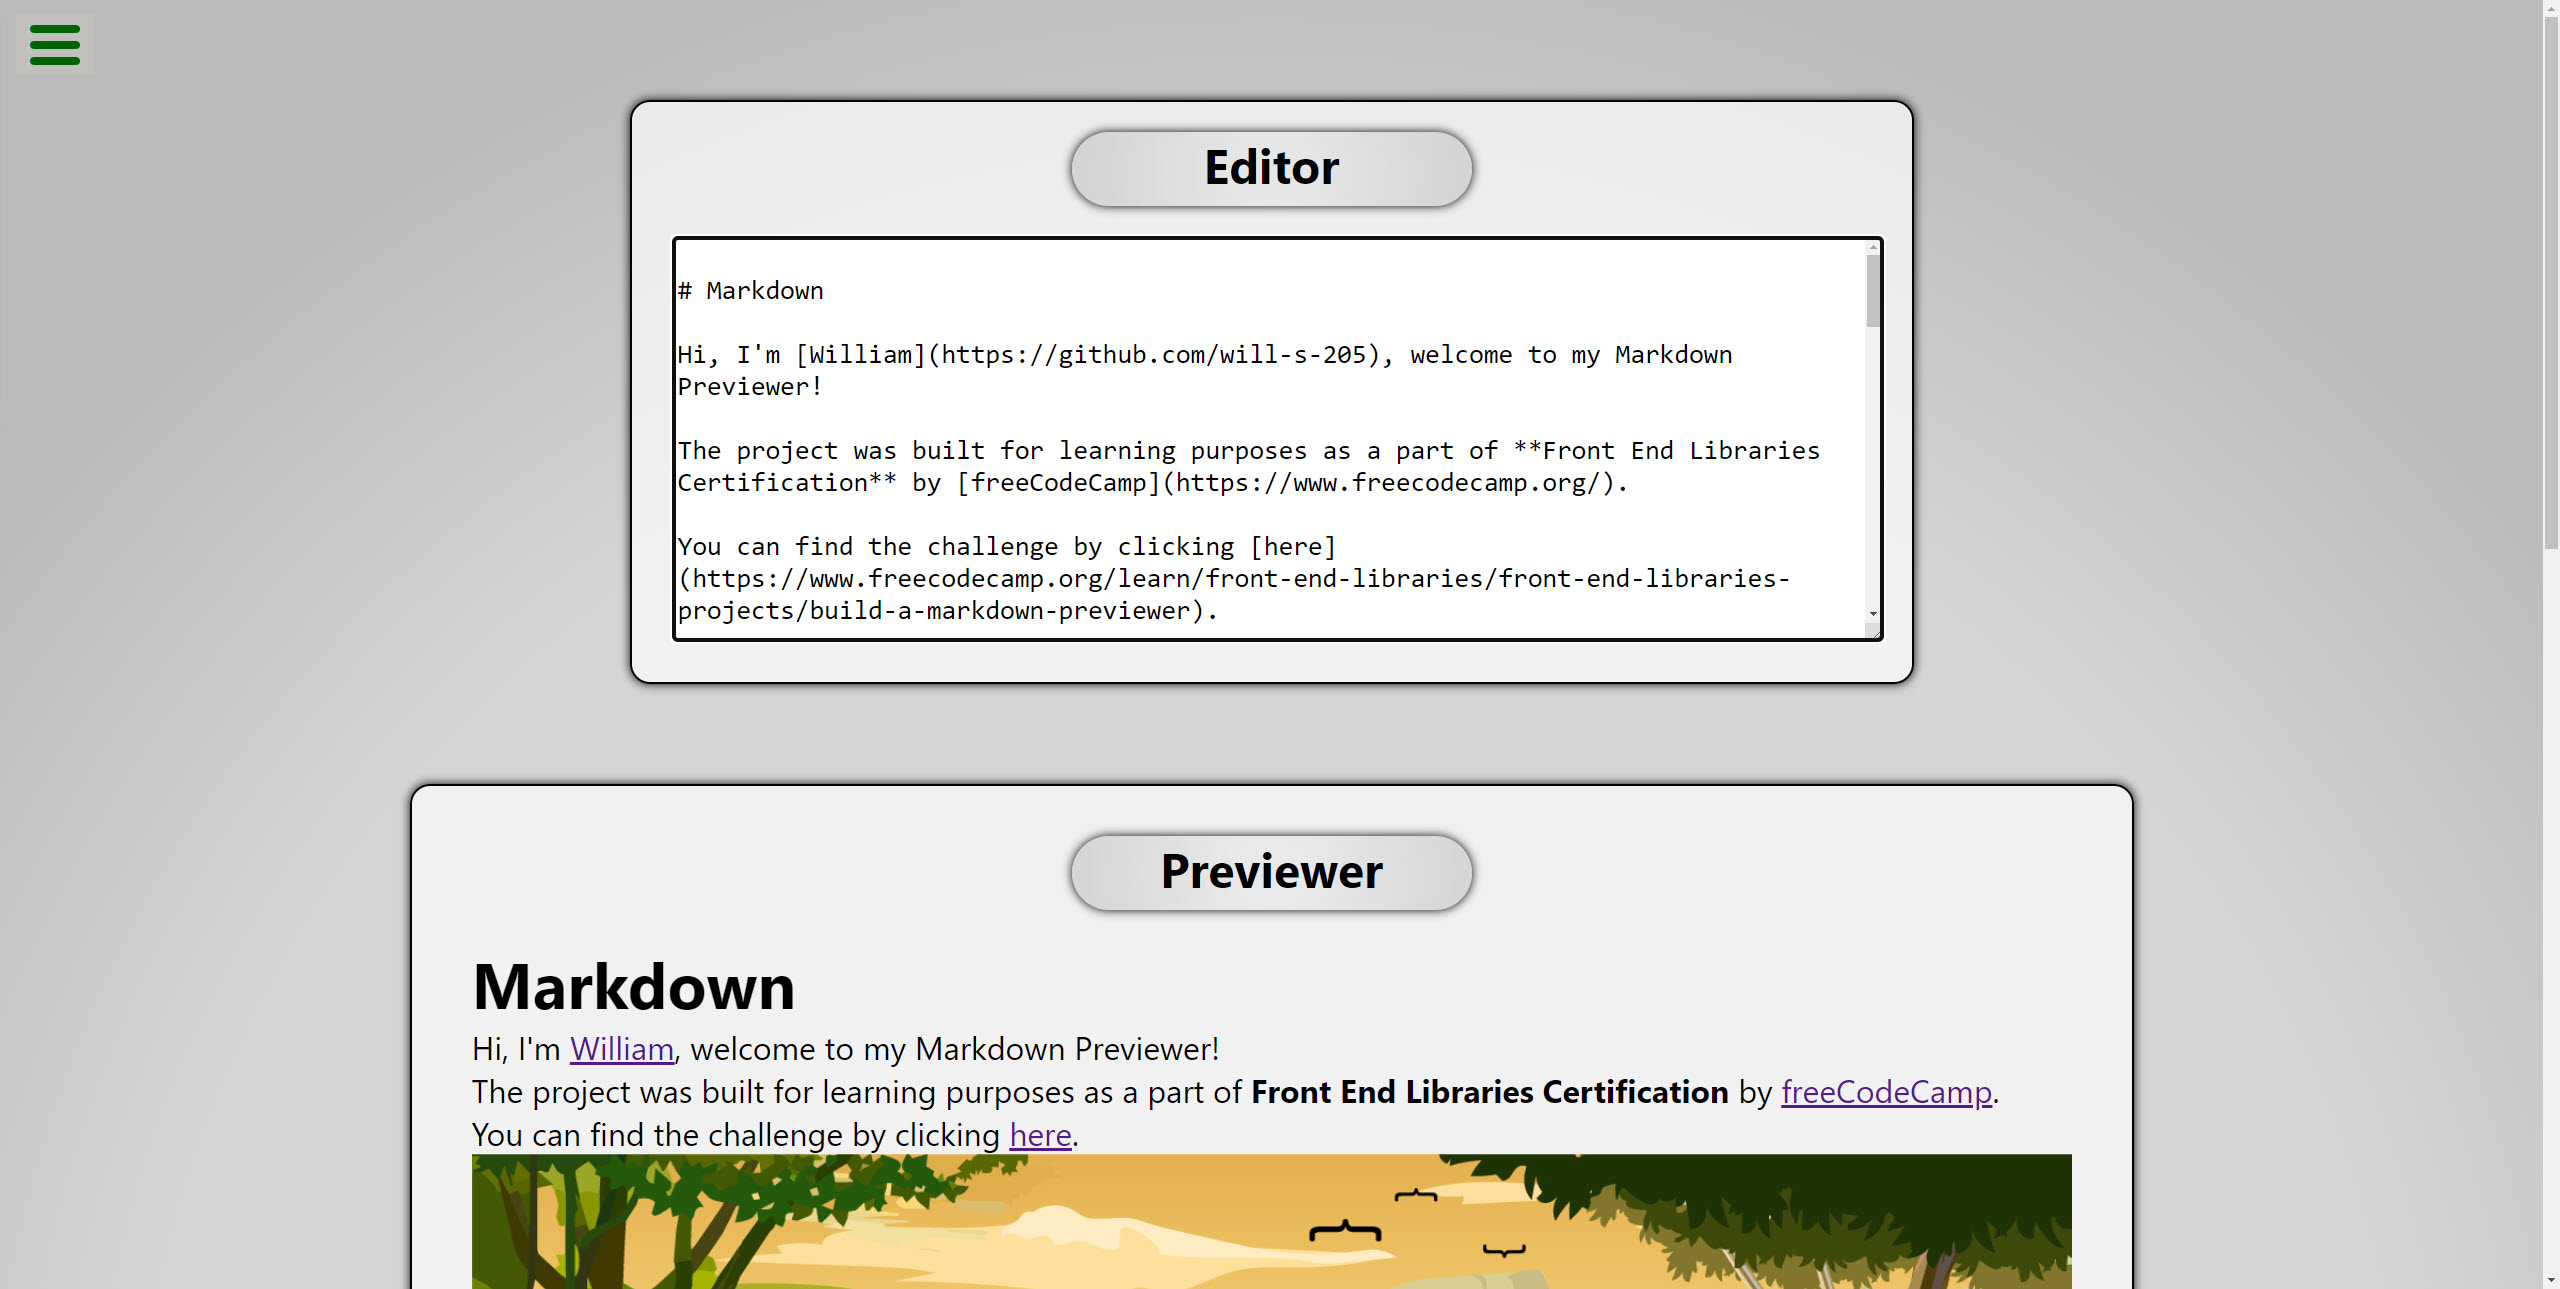 markdown previewer image